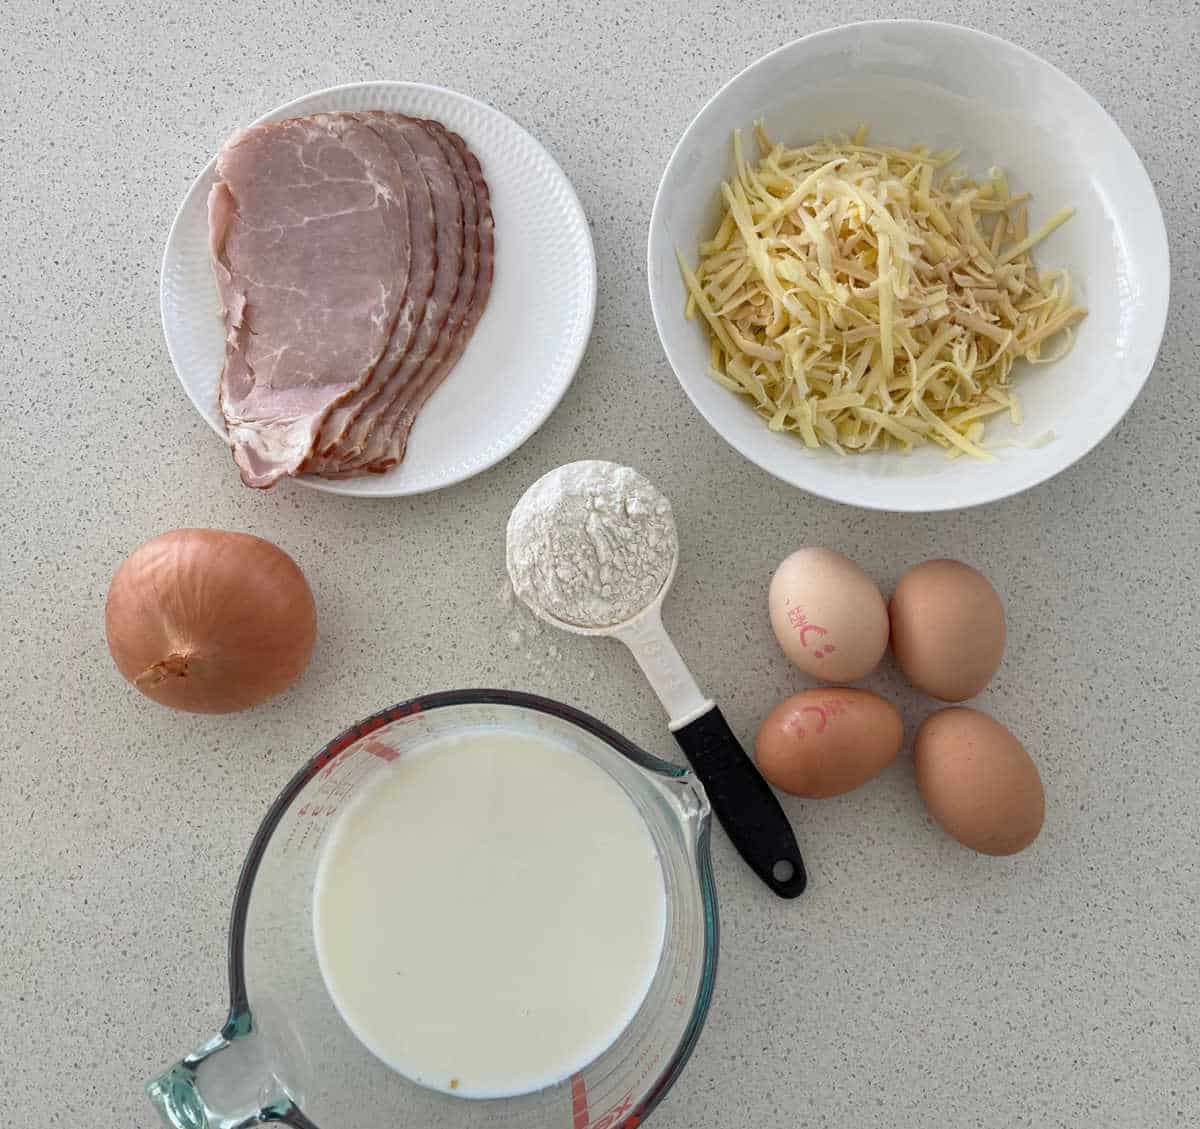 Egg and Bacon Impossible Pie Ingredients